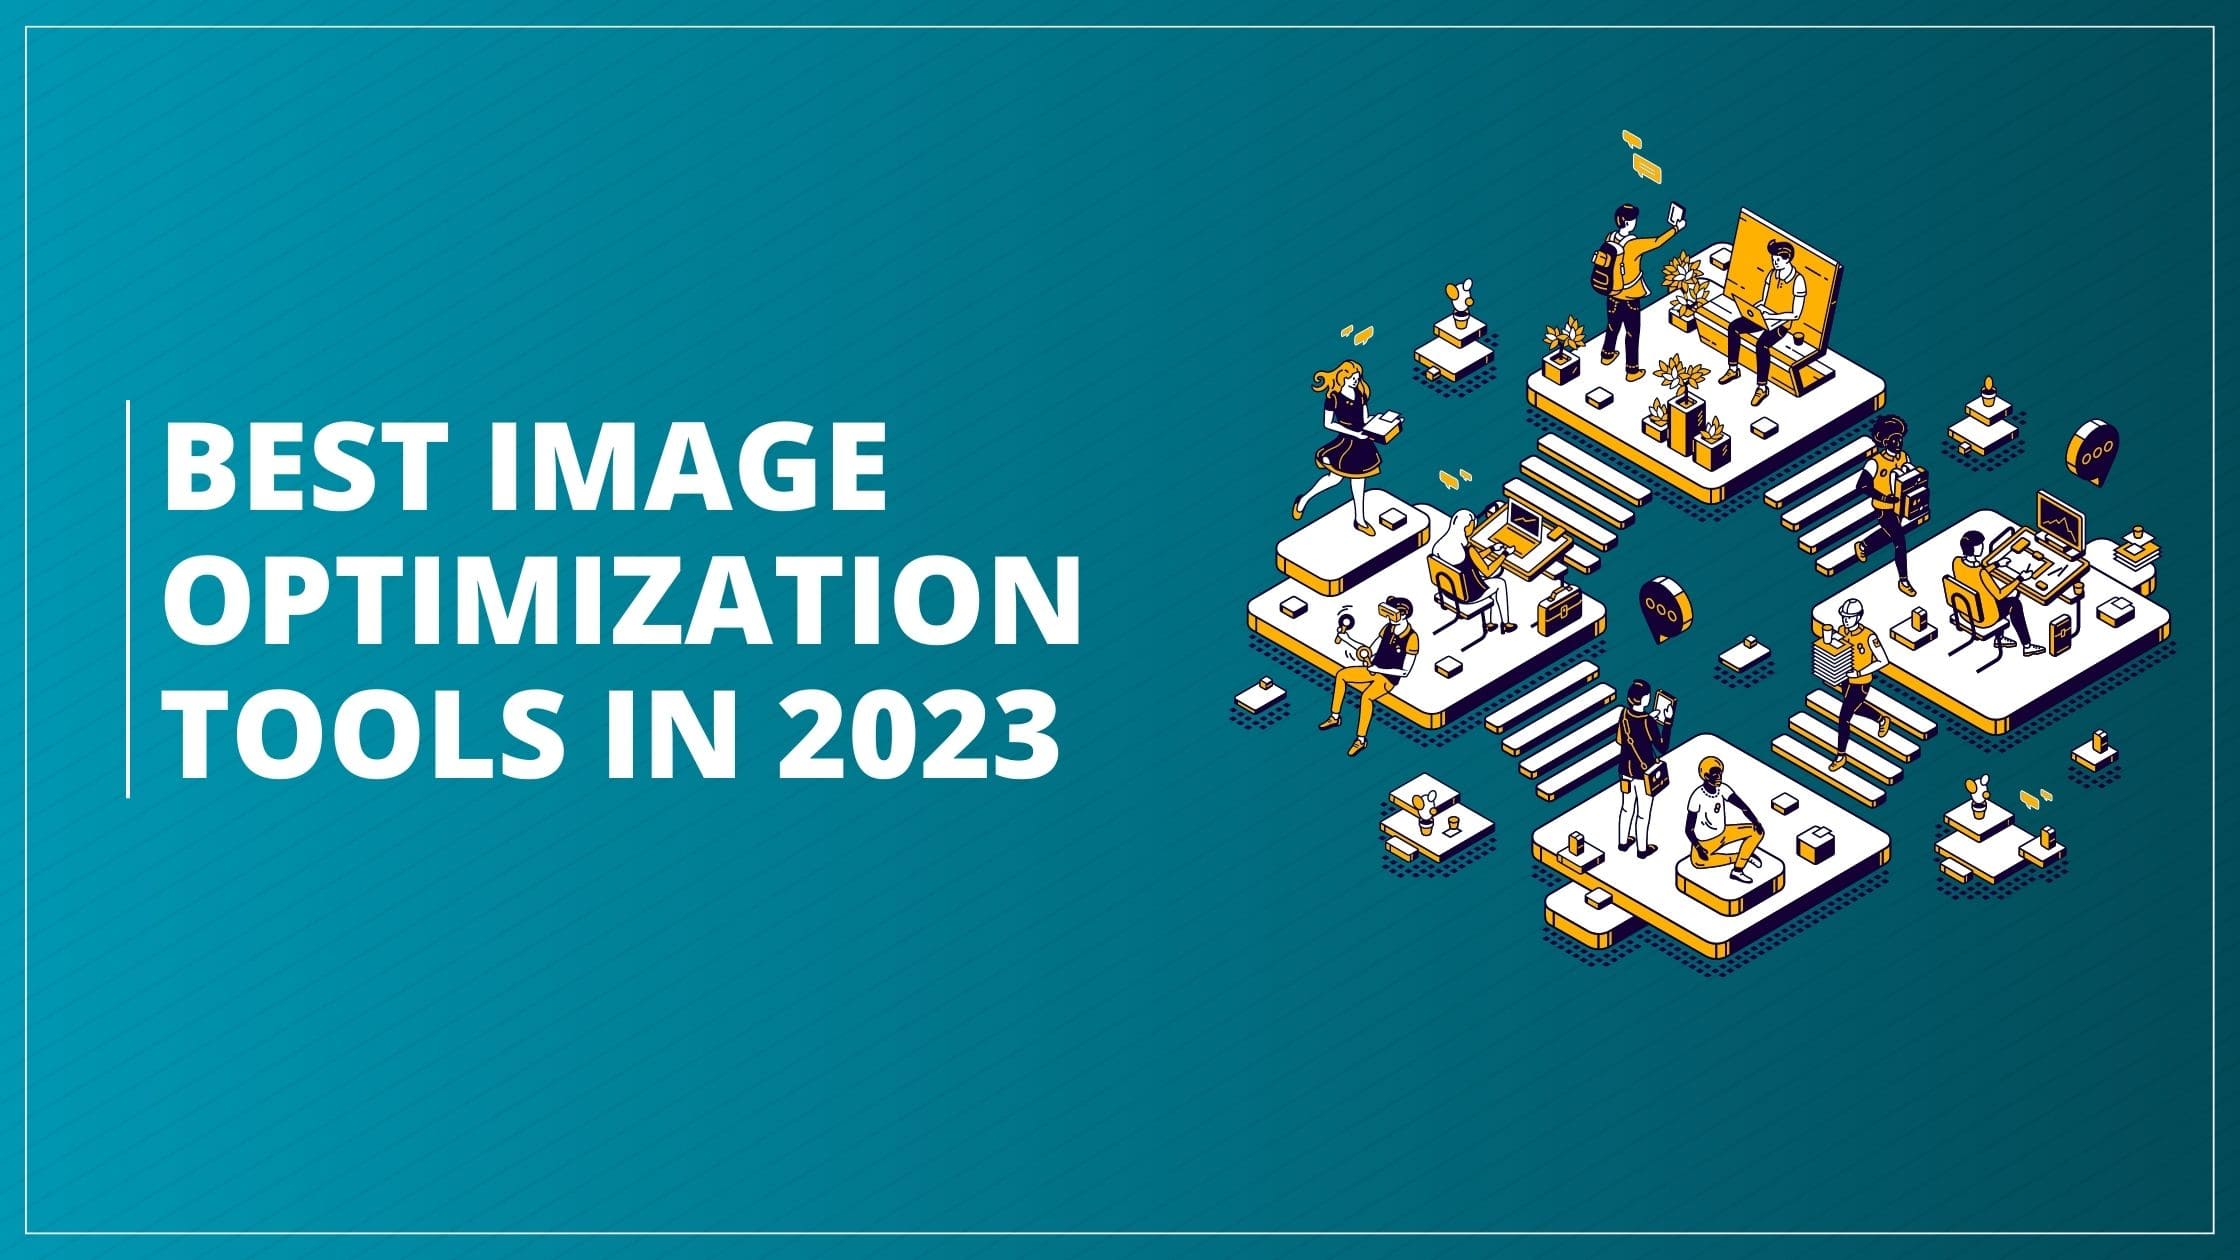 Best Image Optimization Tools in 2023